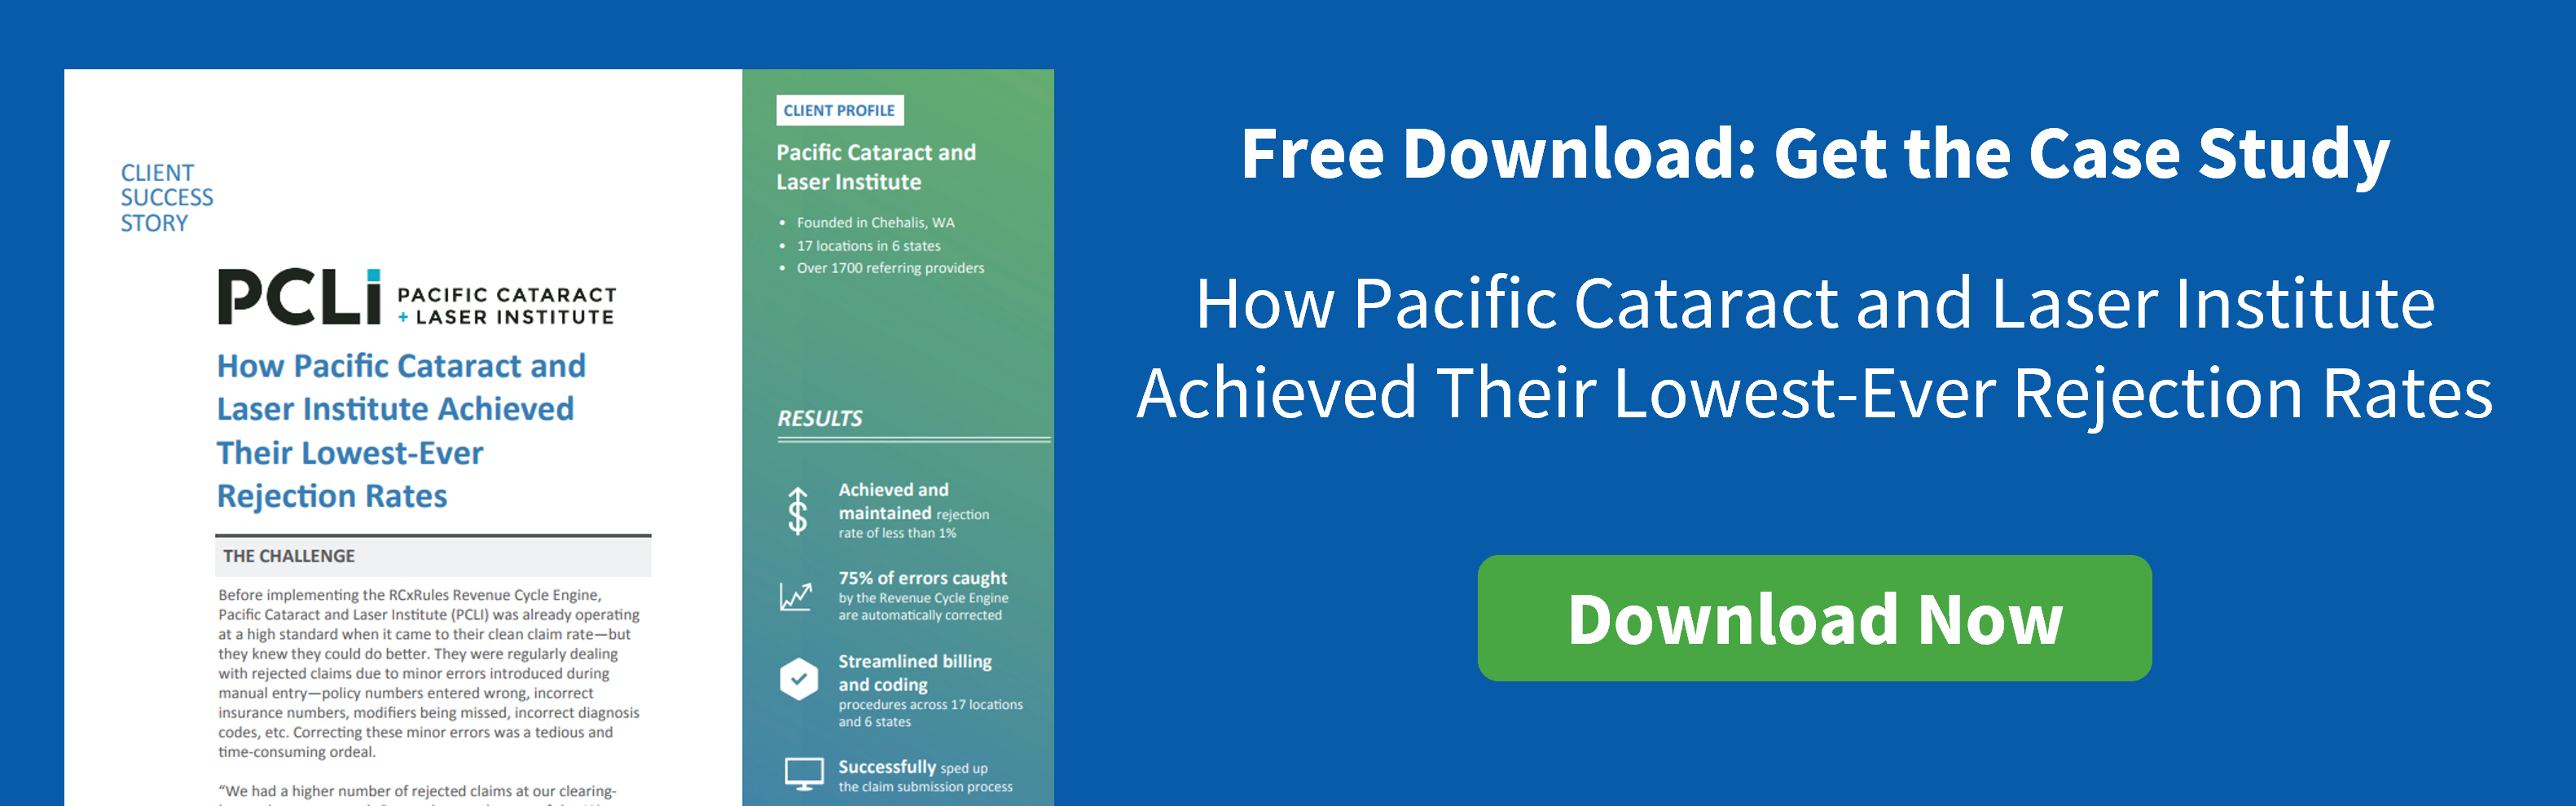 PCLI_Download_CaseStudy